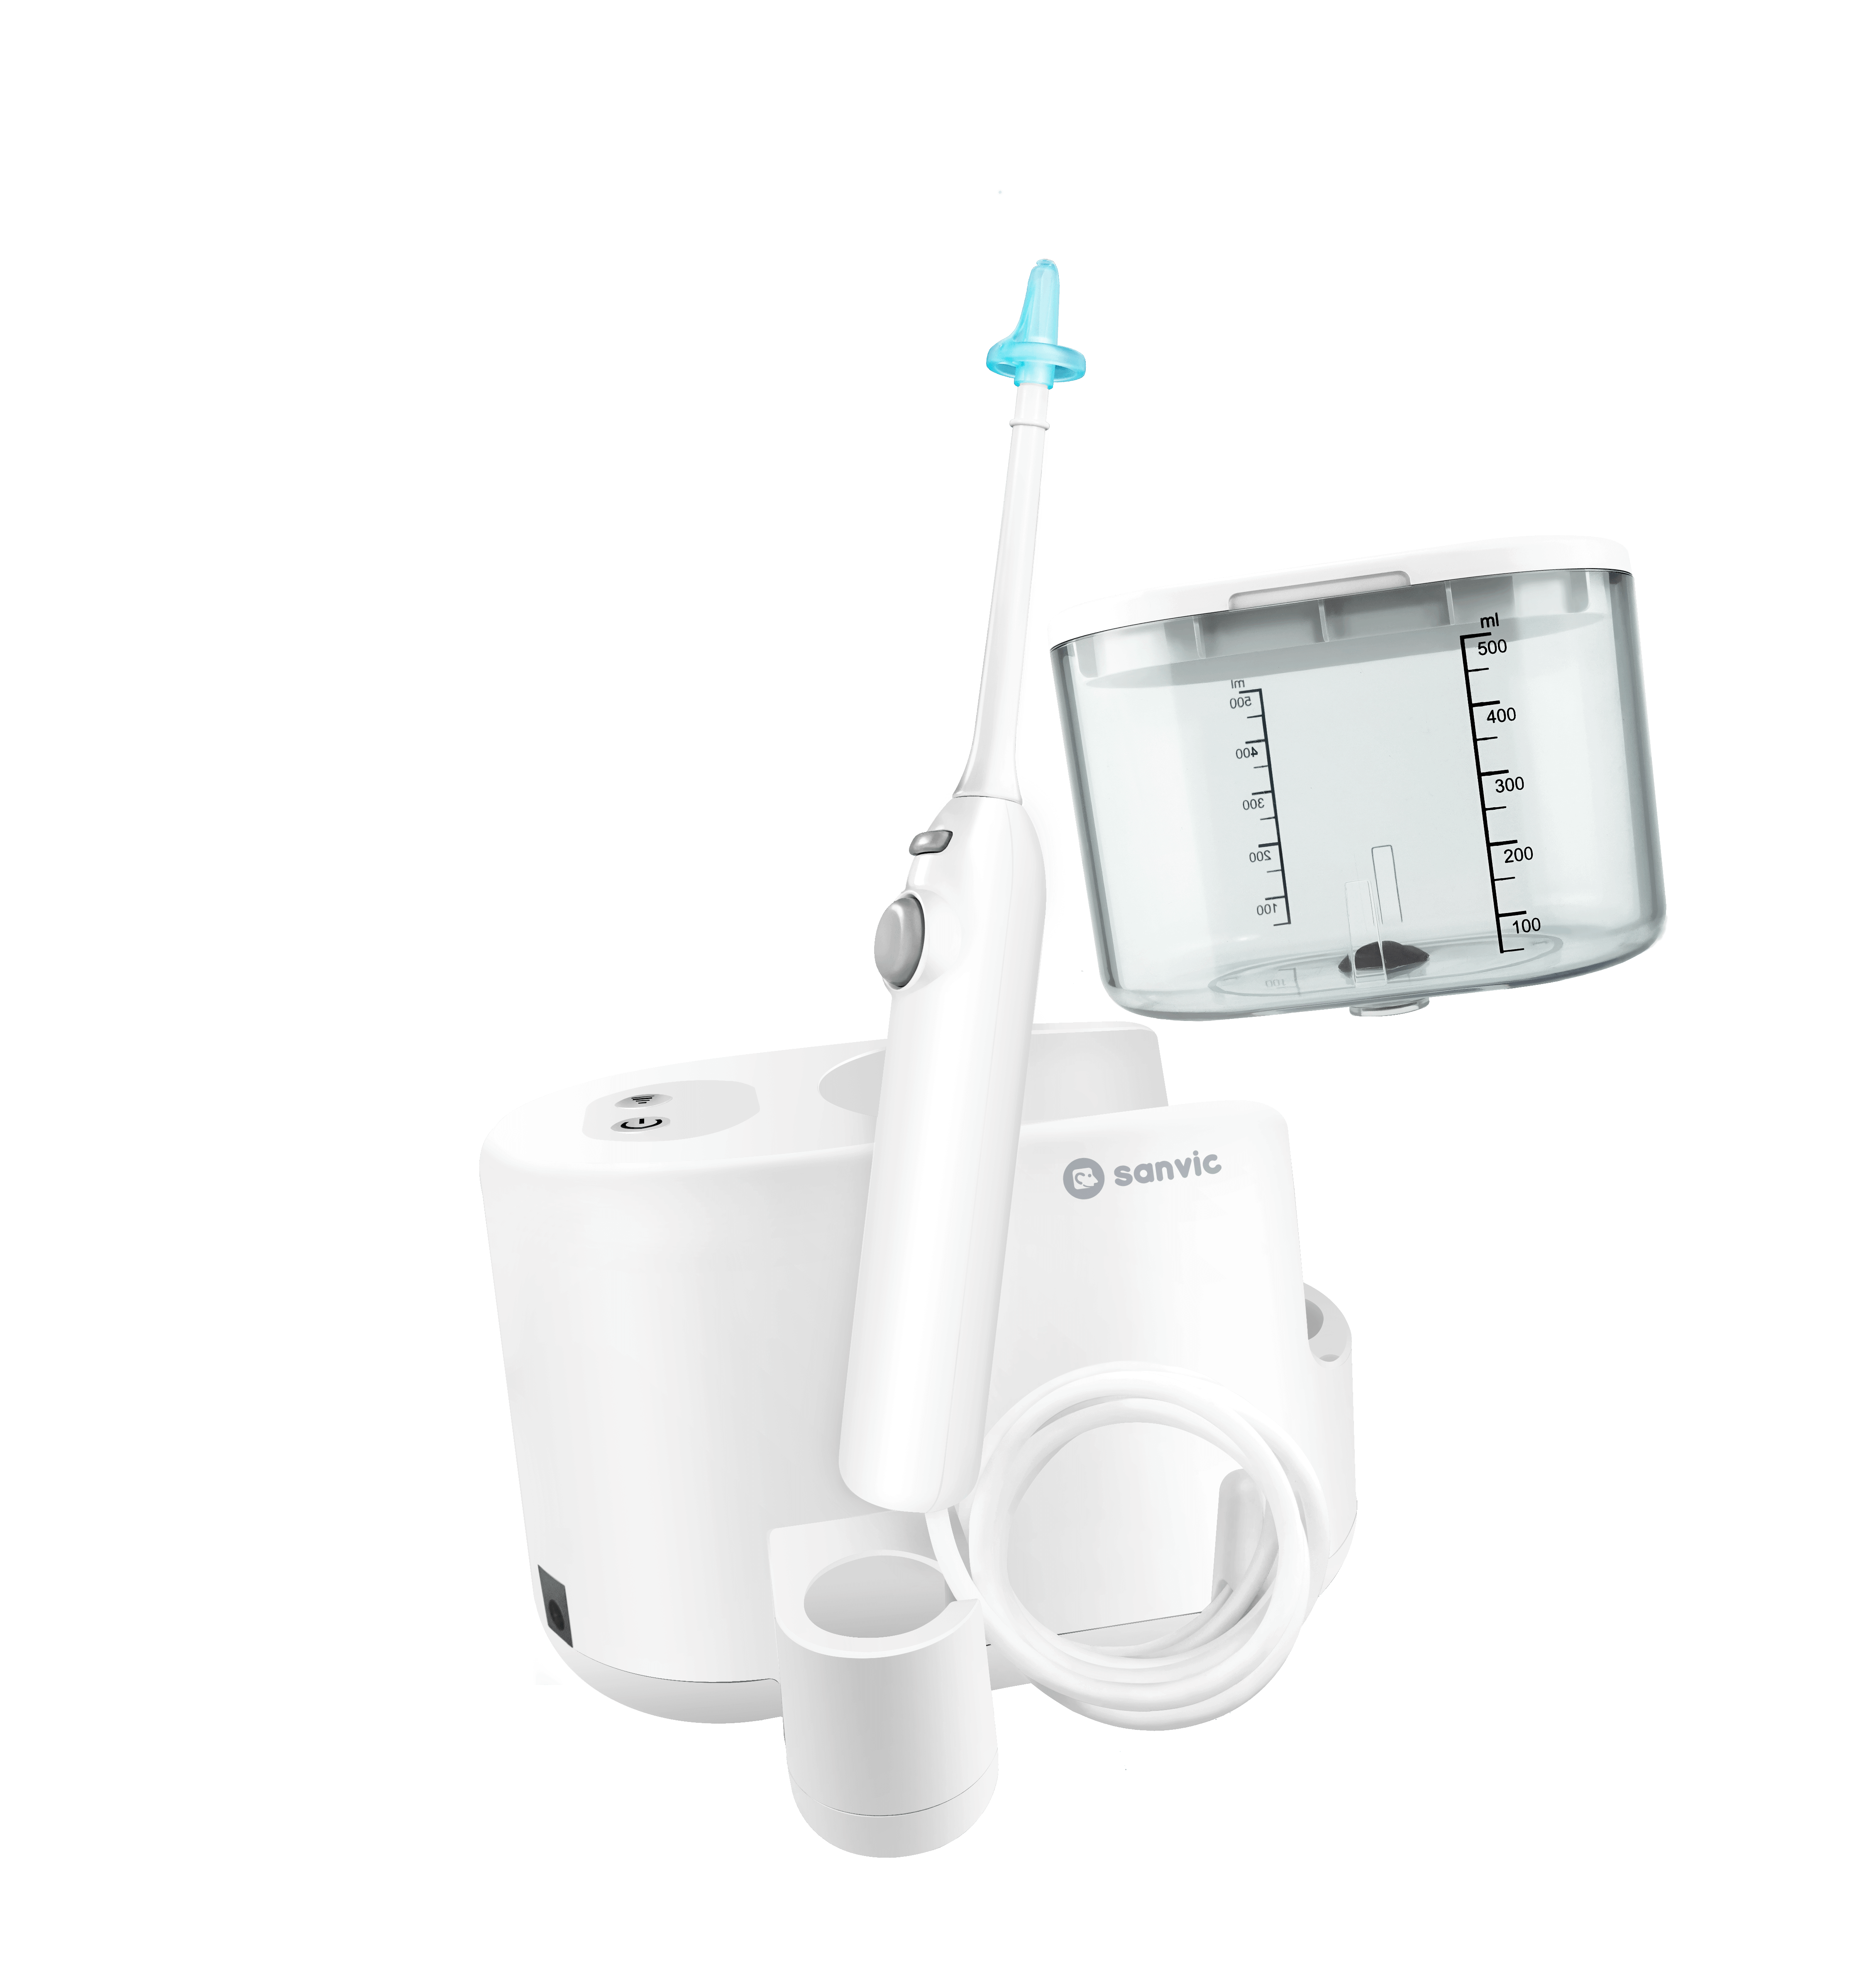 Sanvic Pulsatile Ear Irrigator machine for removing earwax and cleaning ear canal